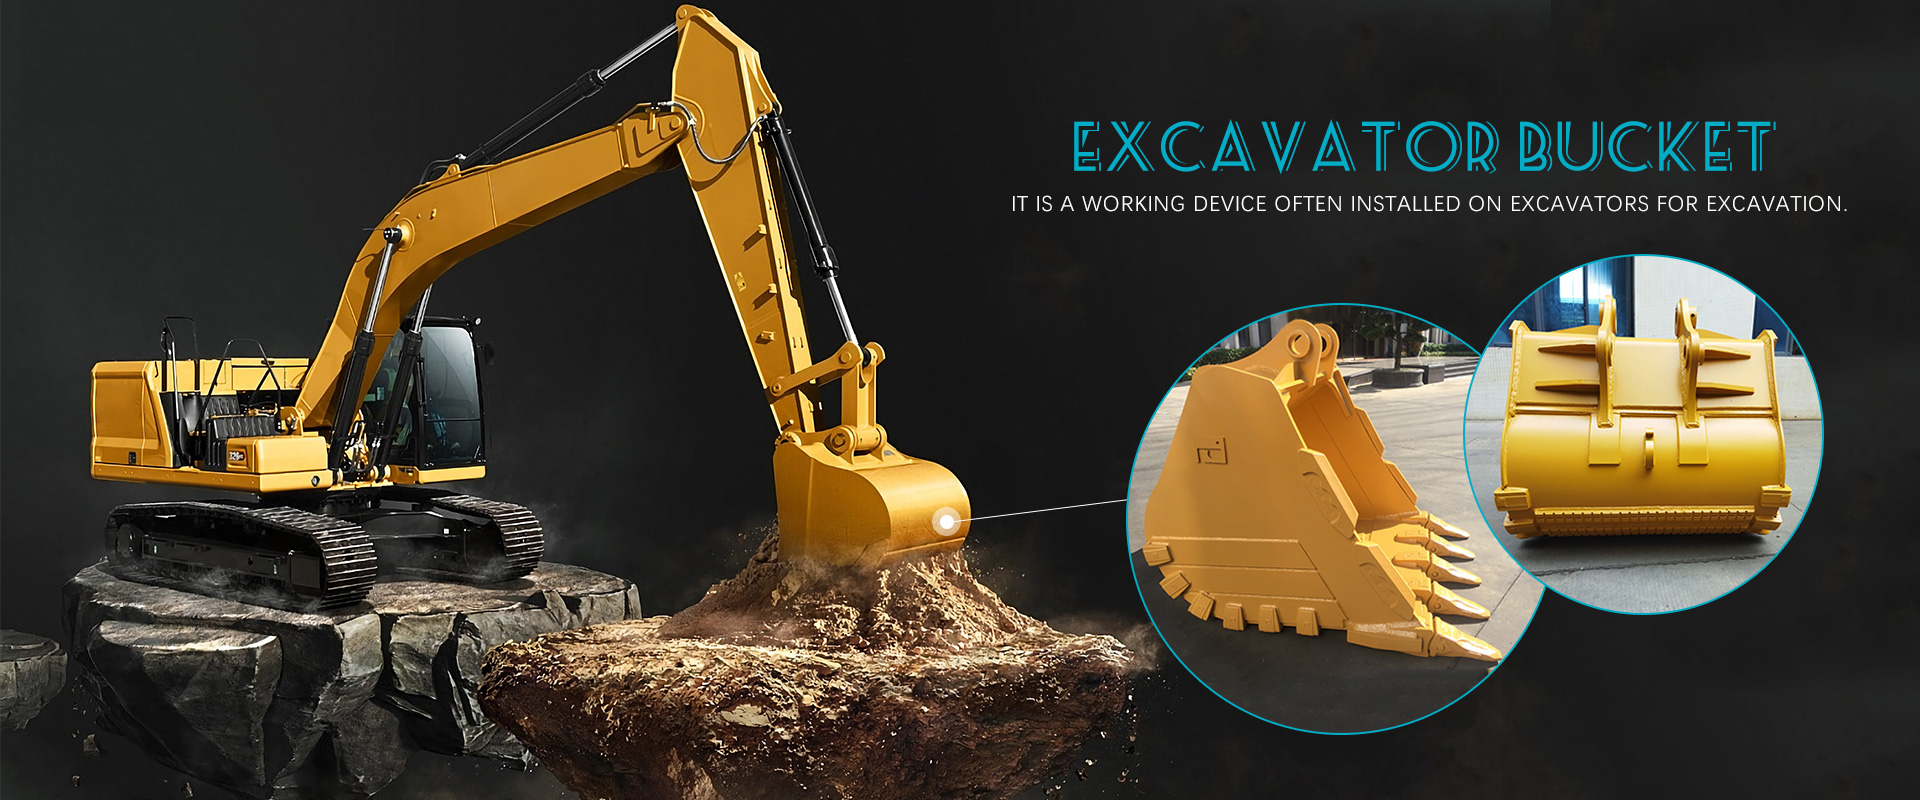 China Excavator Bucket manufacturers and suppliers